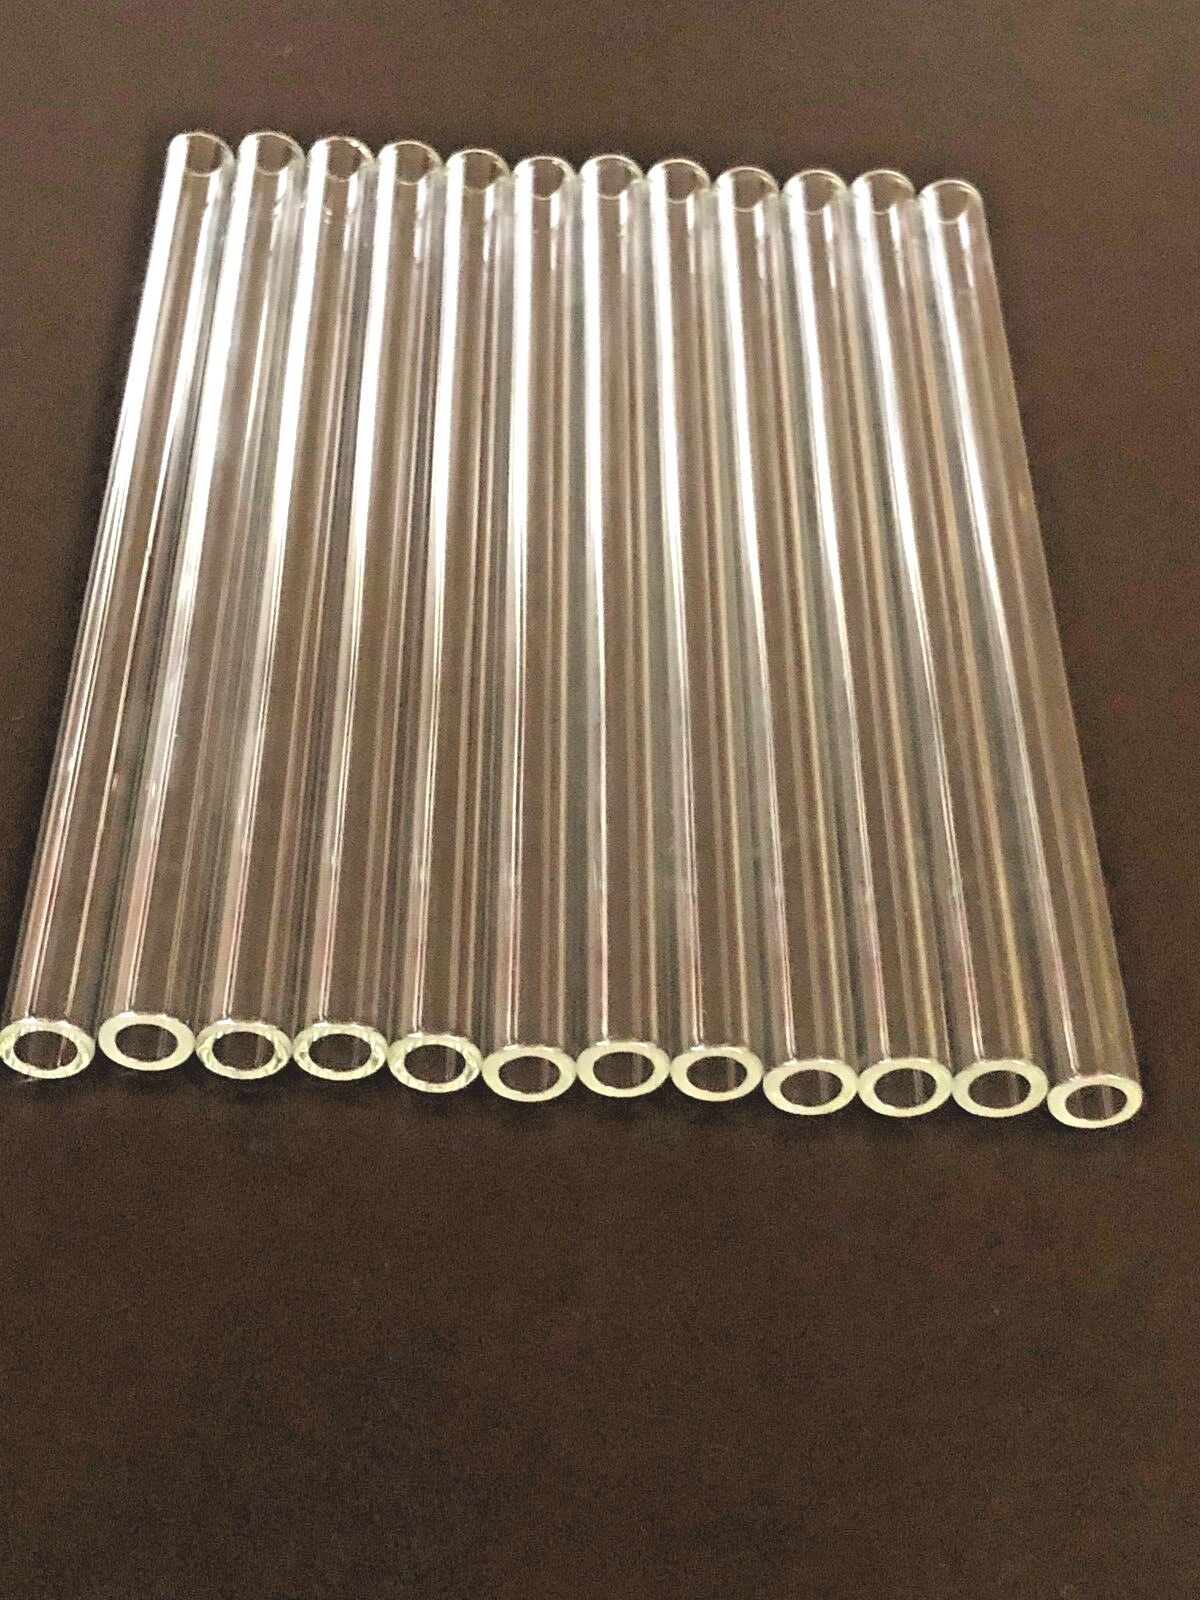 12 Tubes 12x2x4" LONG  PYREX BLOWING GLASS TUBES  12 mm 2 mm THICKNESS -CLEAR  Pyrex - фотография #3